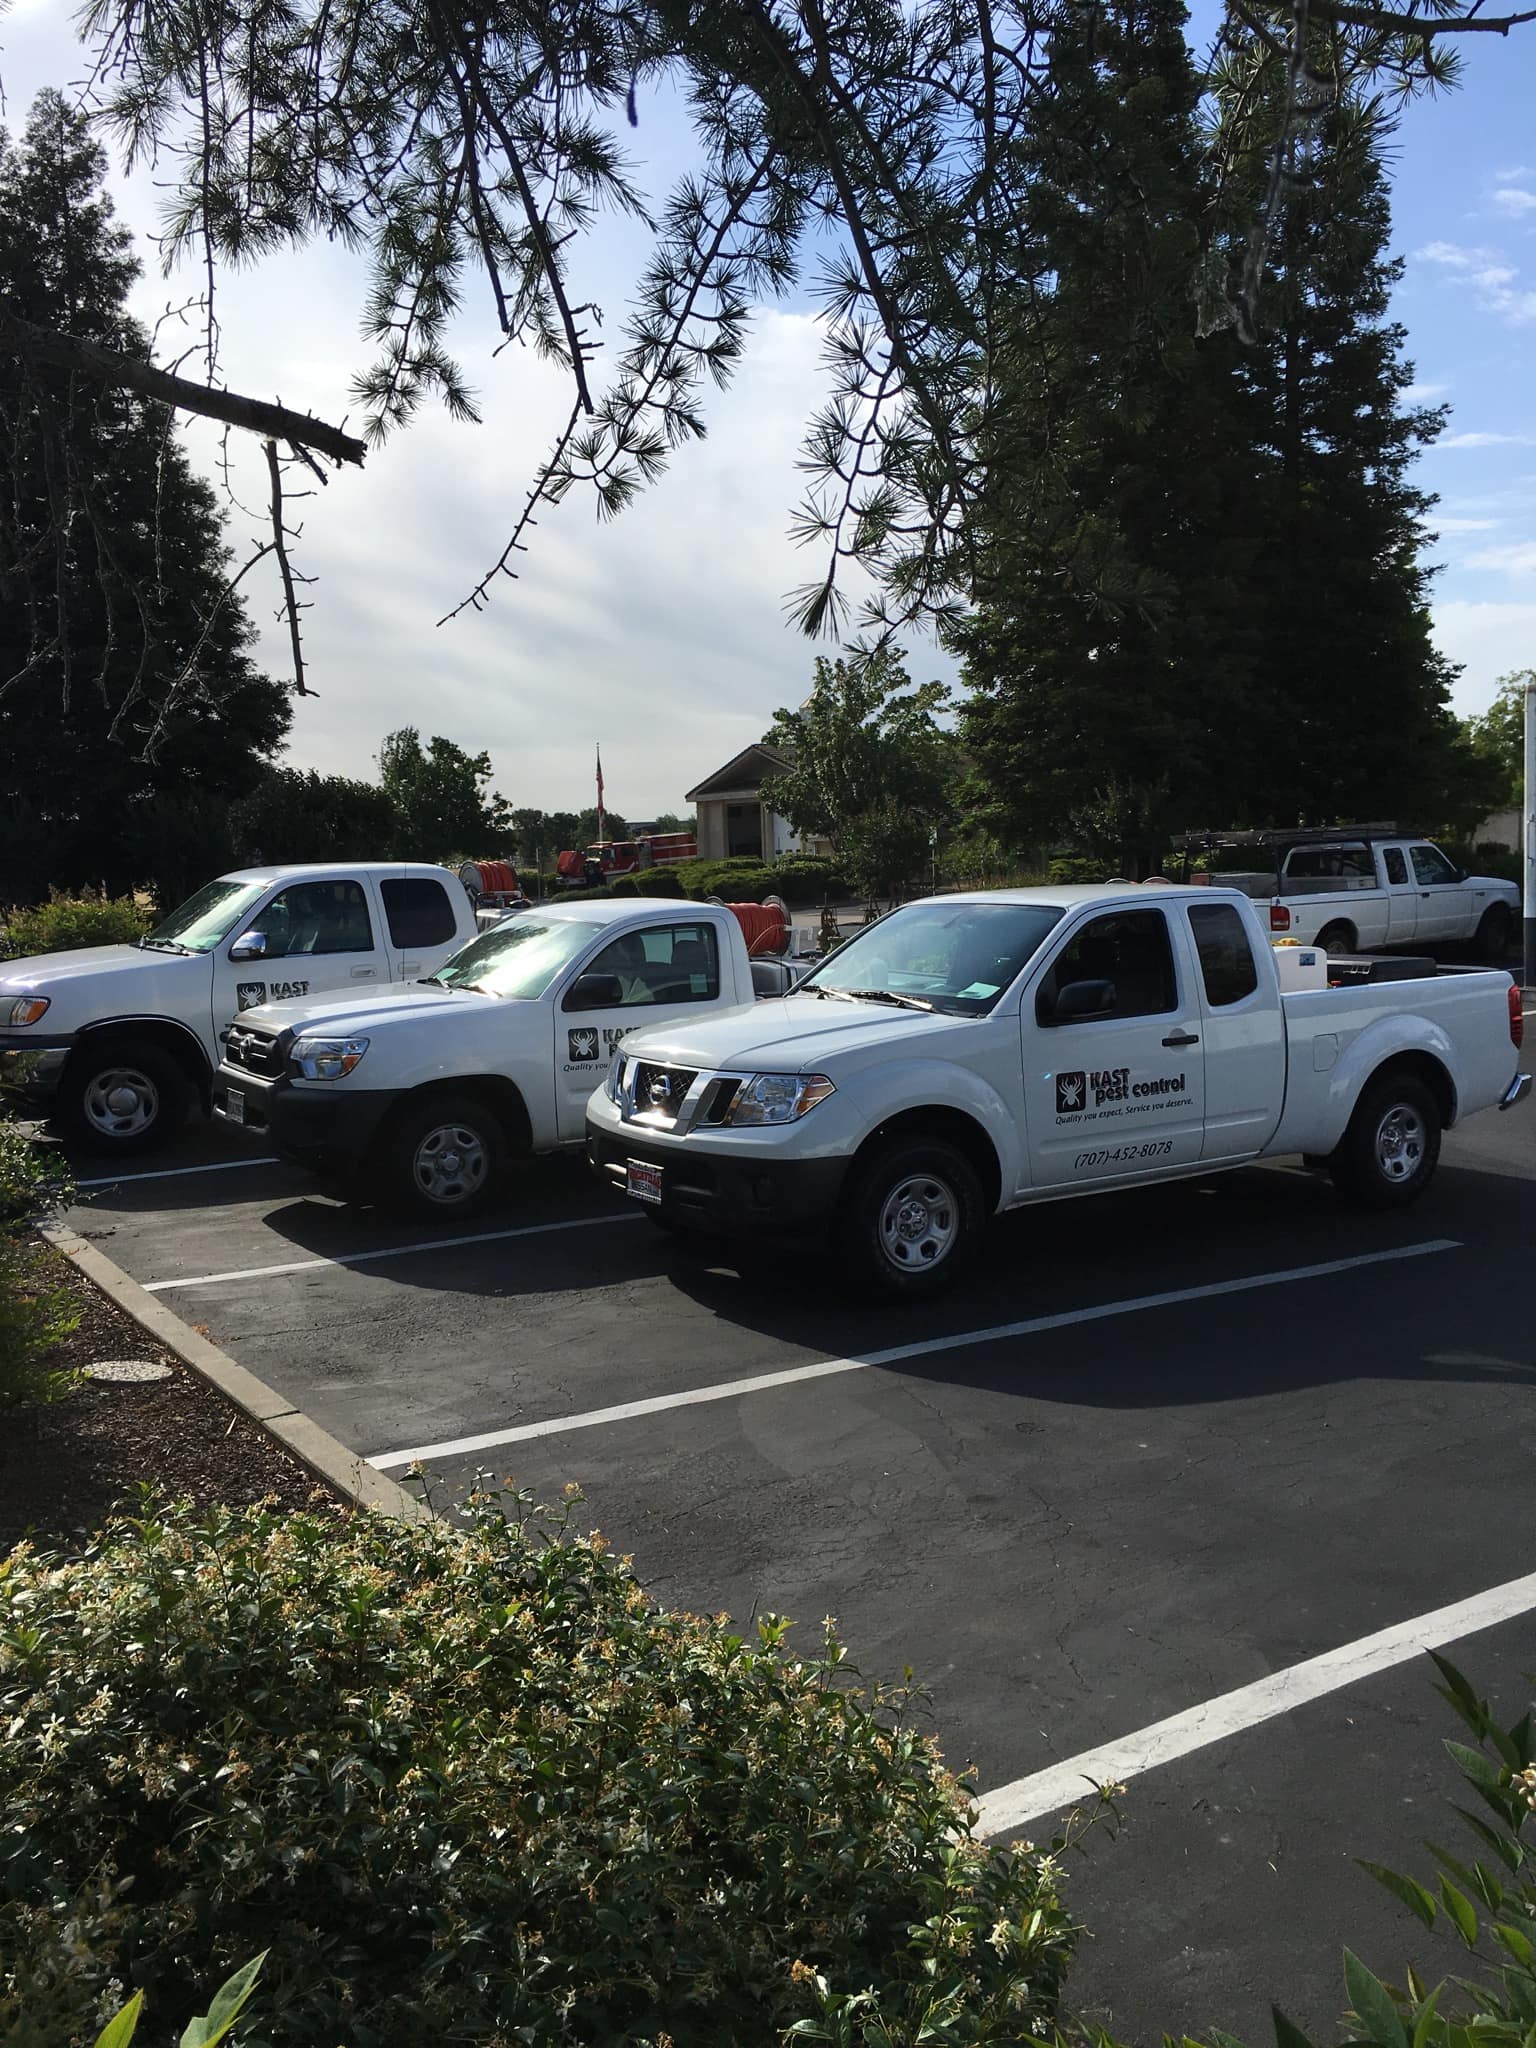 Kast Pest Control - Vacaville, CA, US, bed bug treatment